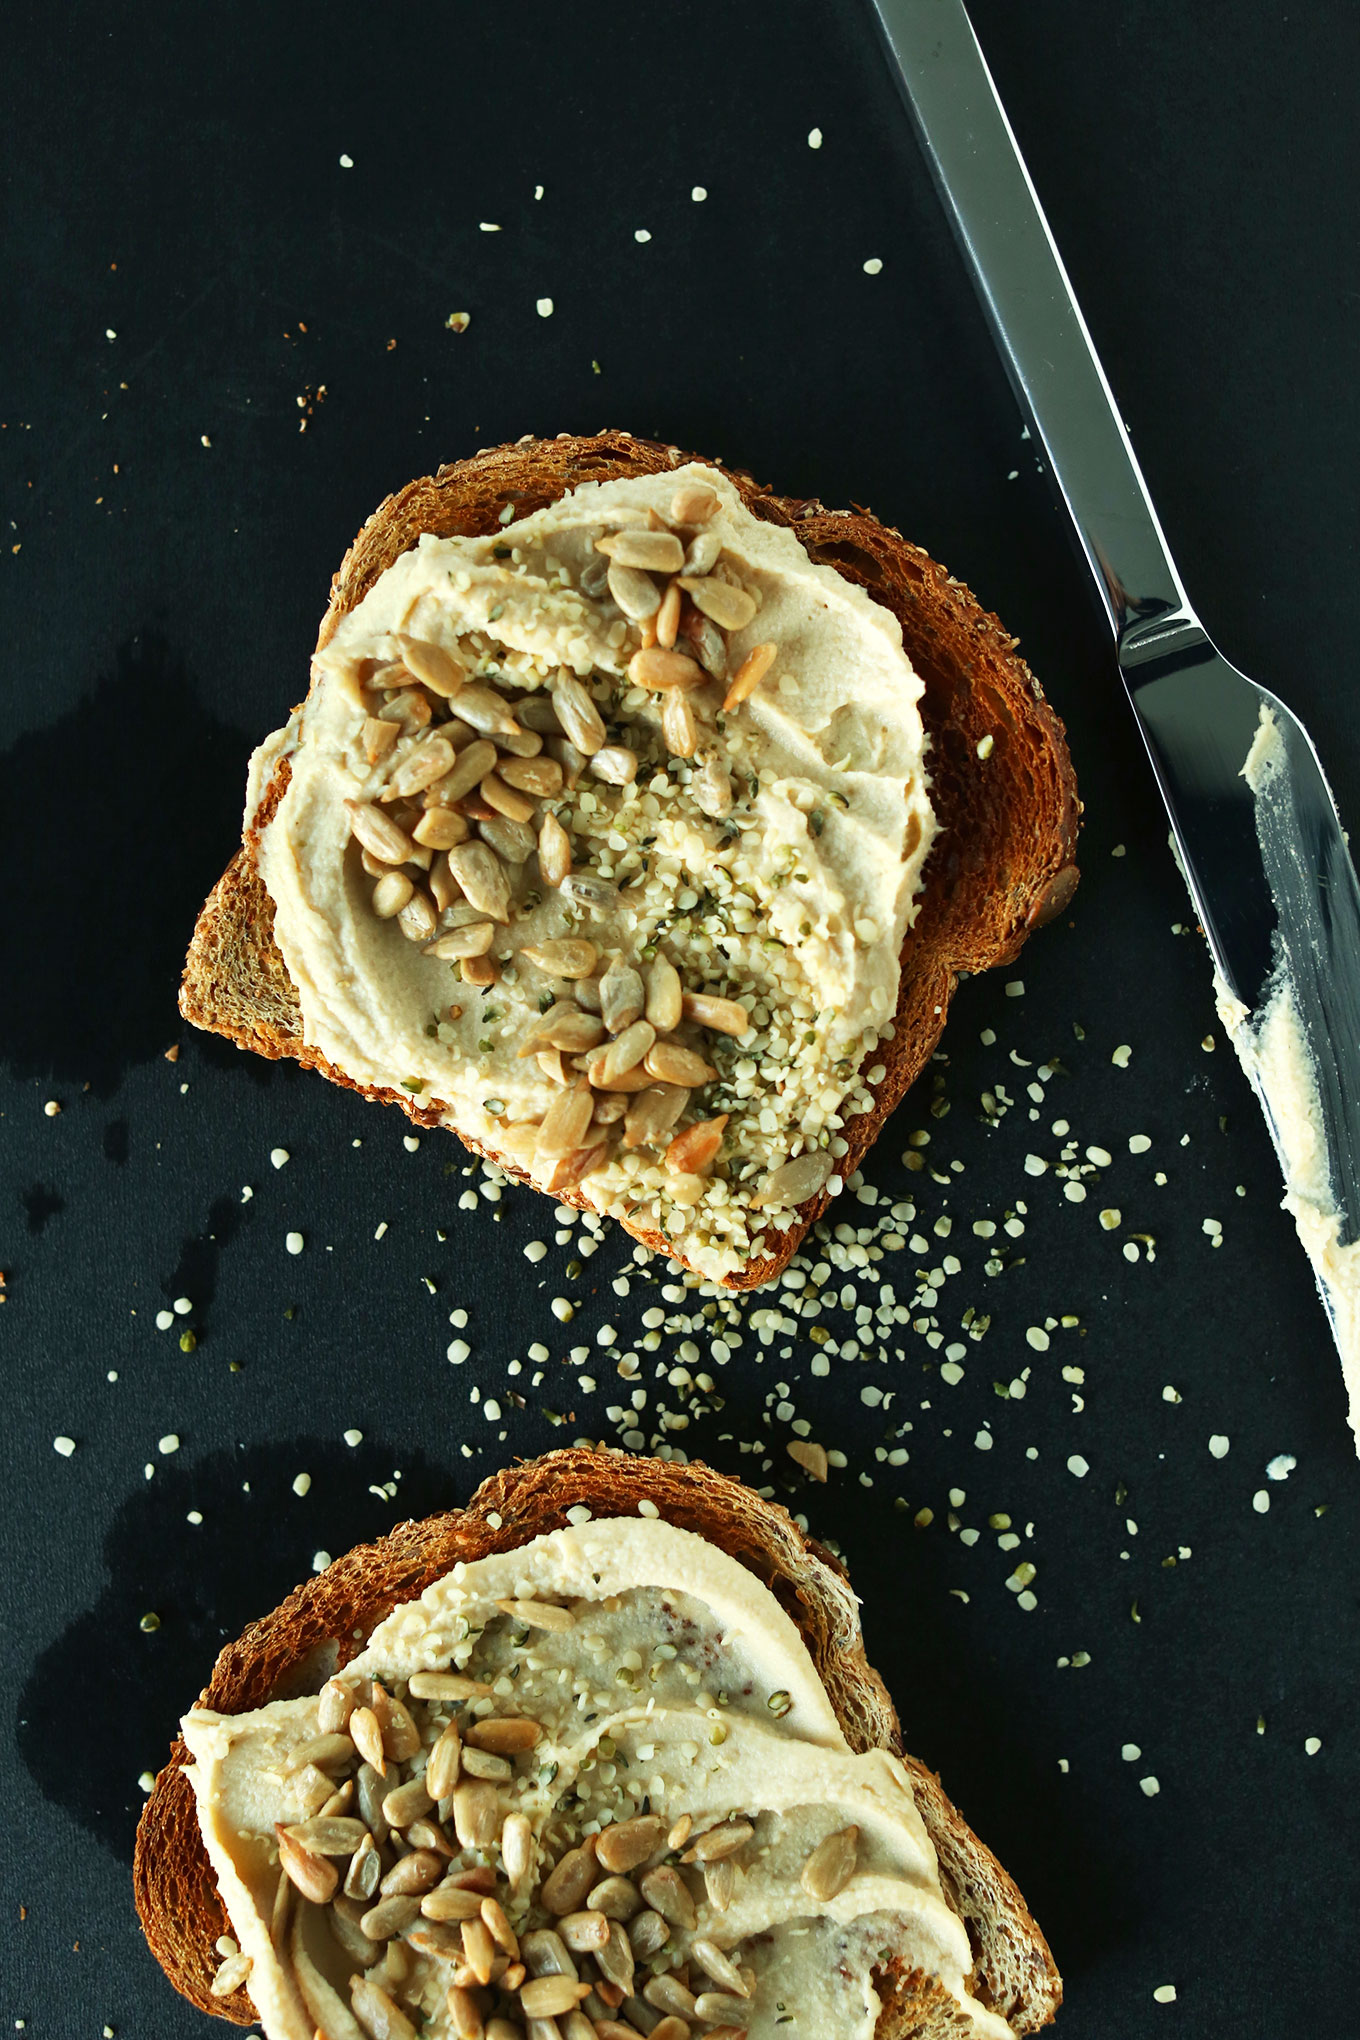 Slices of toast topped with hummus, hemp seeds, and sunflower seeds